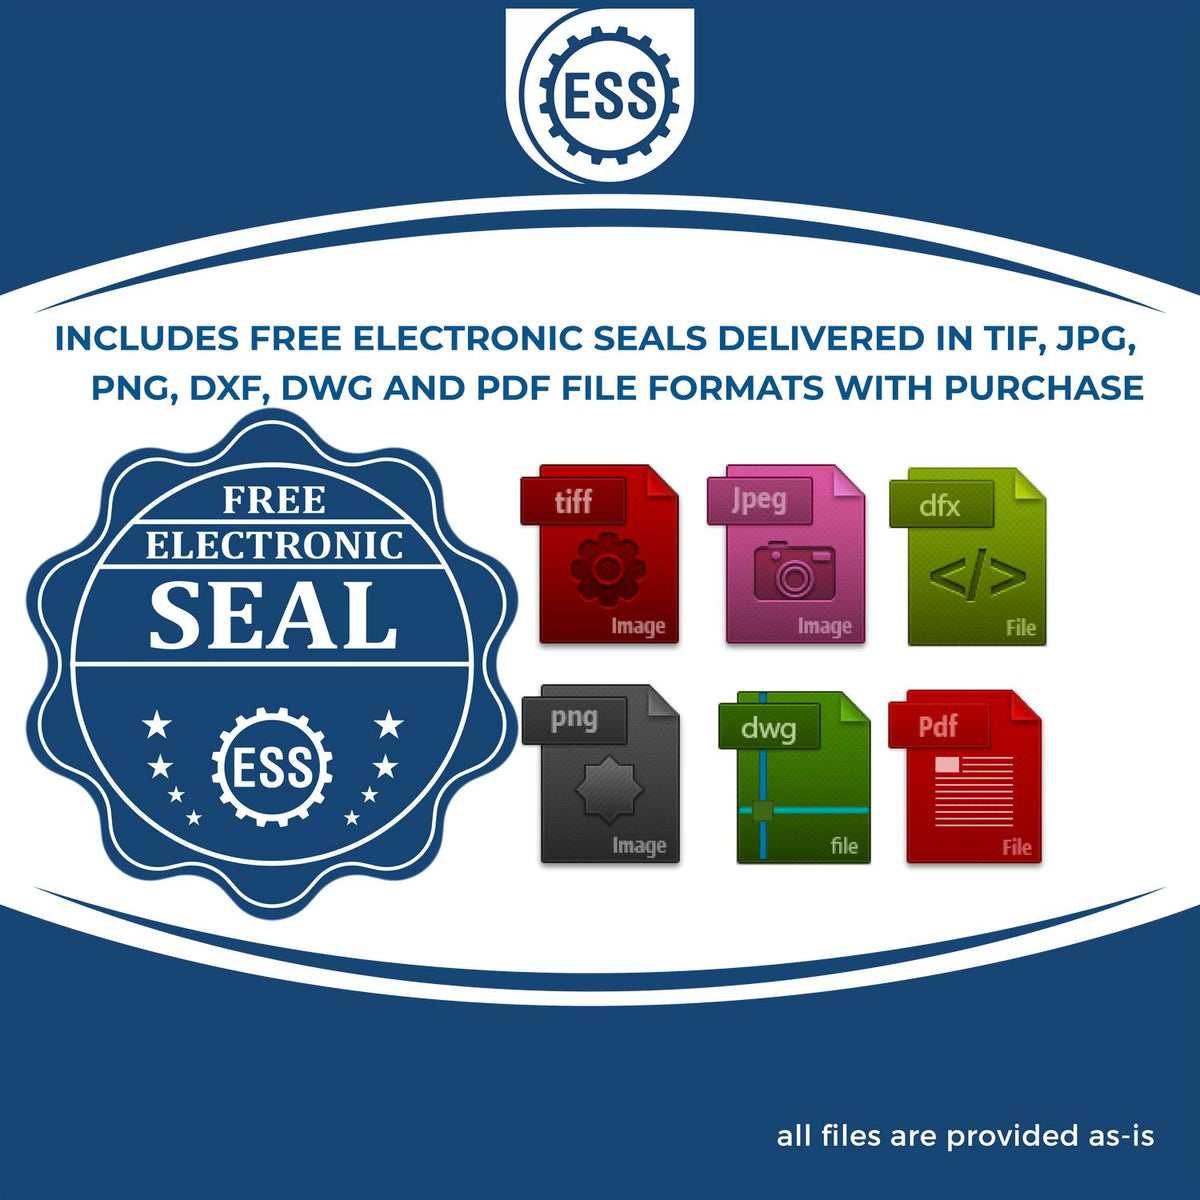 An infographic for the free electronic seal for the Gift Mississippi Geologist Seal illustrating the different file type icons such as DXF, DWG, TIF, JPG and PNG.